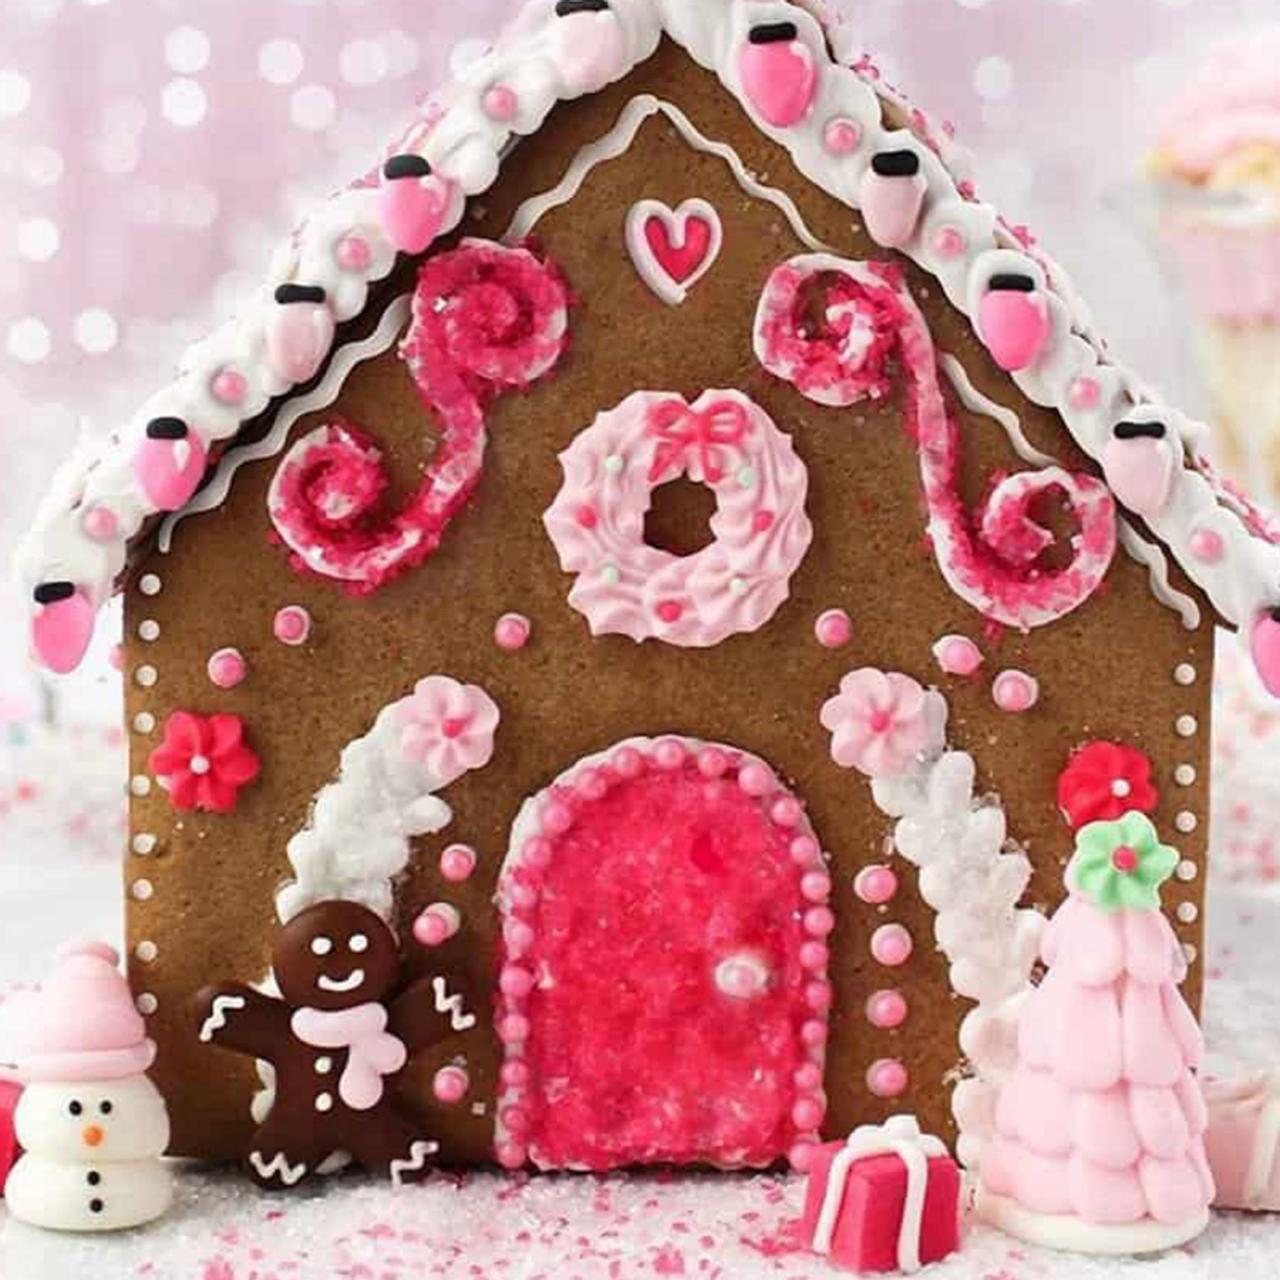 https://food.fnr.sndimg.com/content/dam/images/food/products/2022/11/28/rx_bakery-bling-pink-gingerbread-house-opener_s4x3.jpg.rend.hgtvcom.1280.1280.suffix/1669664118913.jpeg